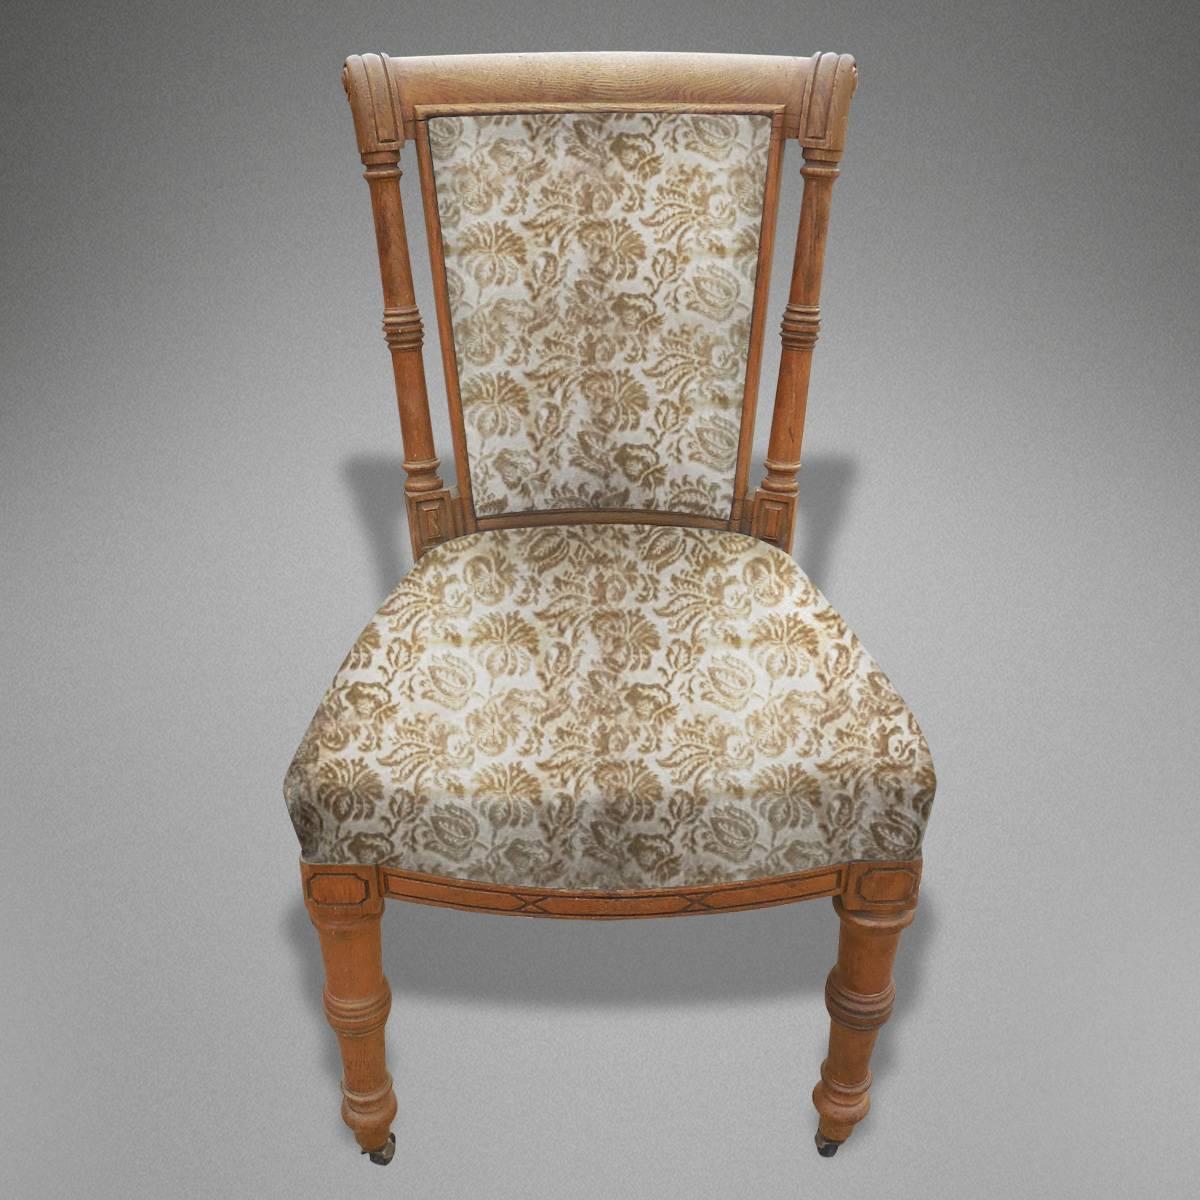 A rare set of 34 mid-19th century dining chairs in finest English golden oak.

Could sell as a set of 24 or any variant.